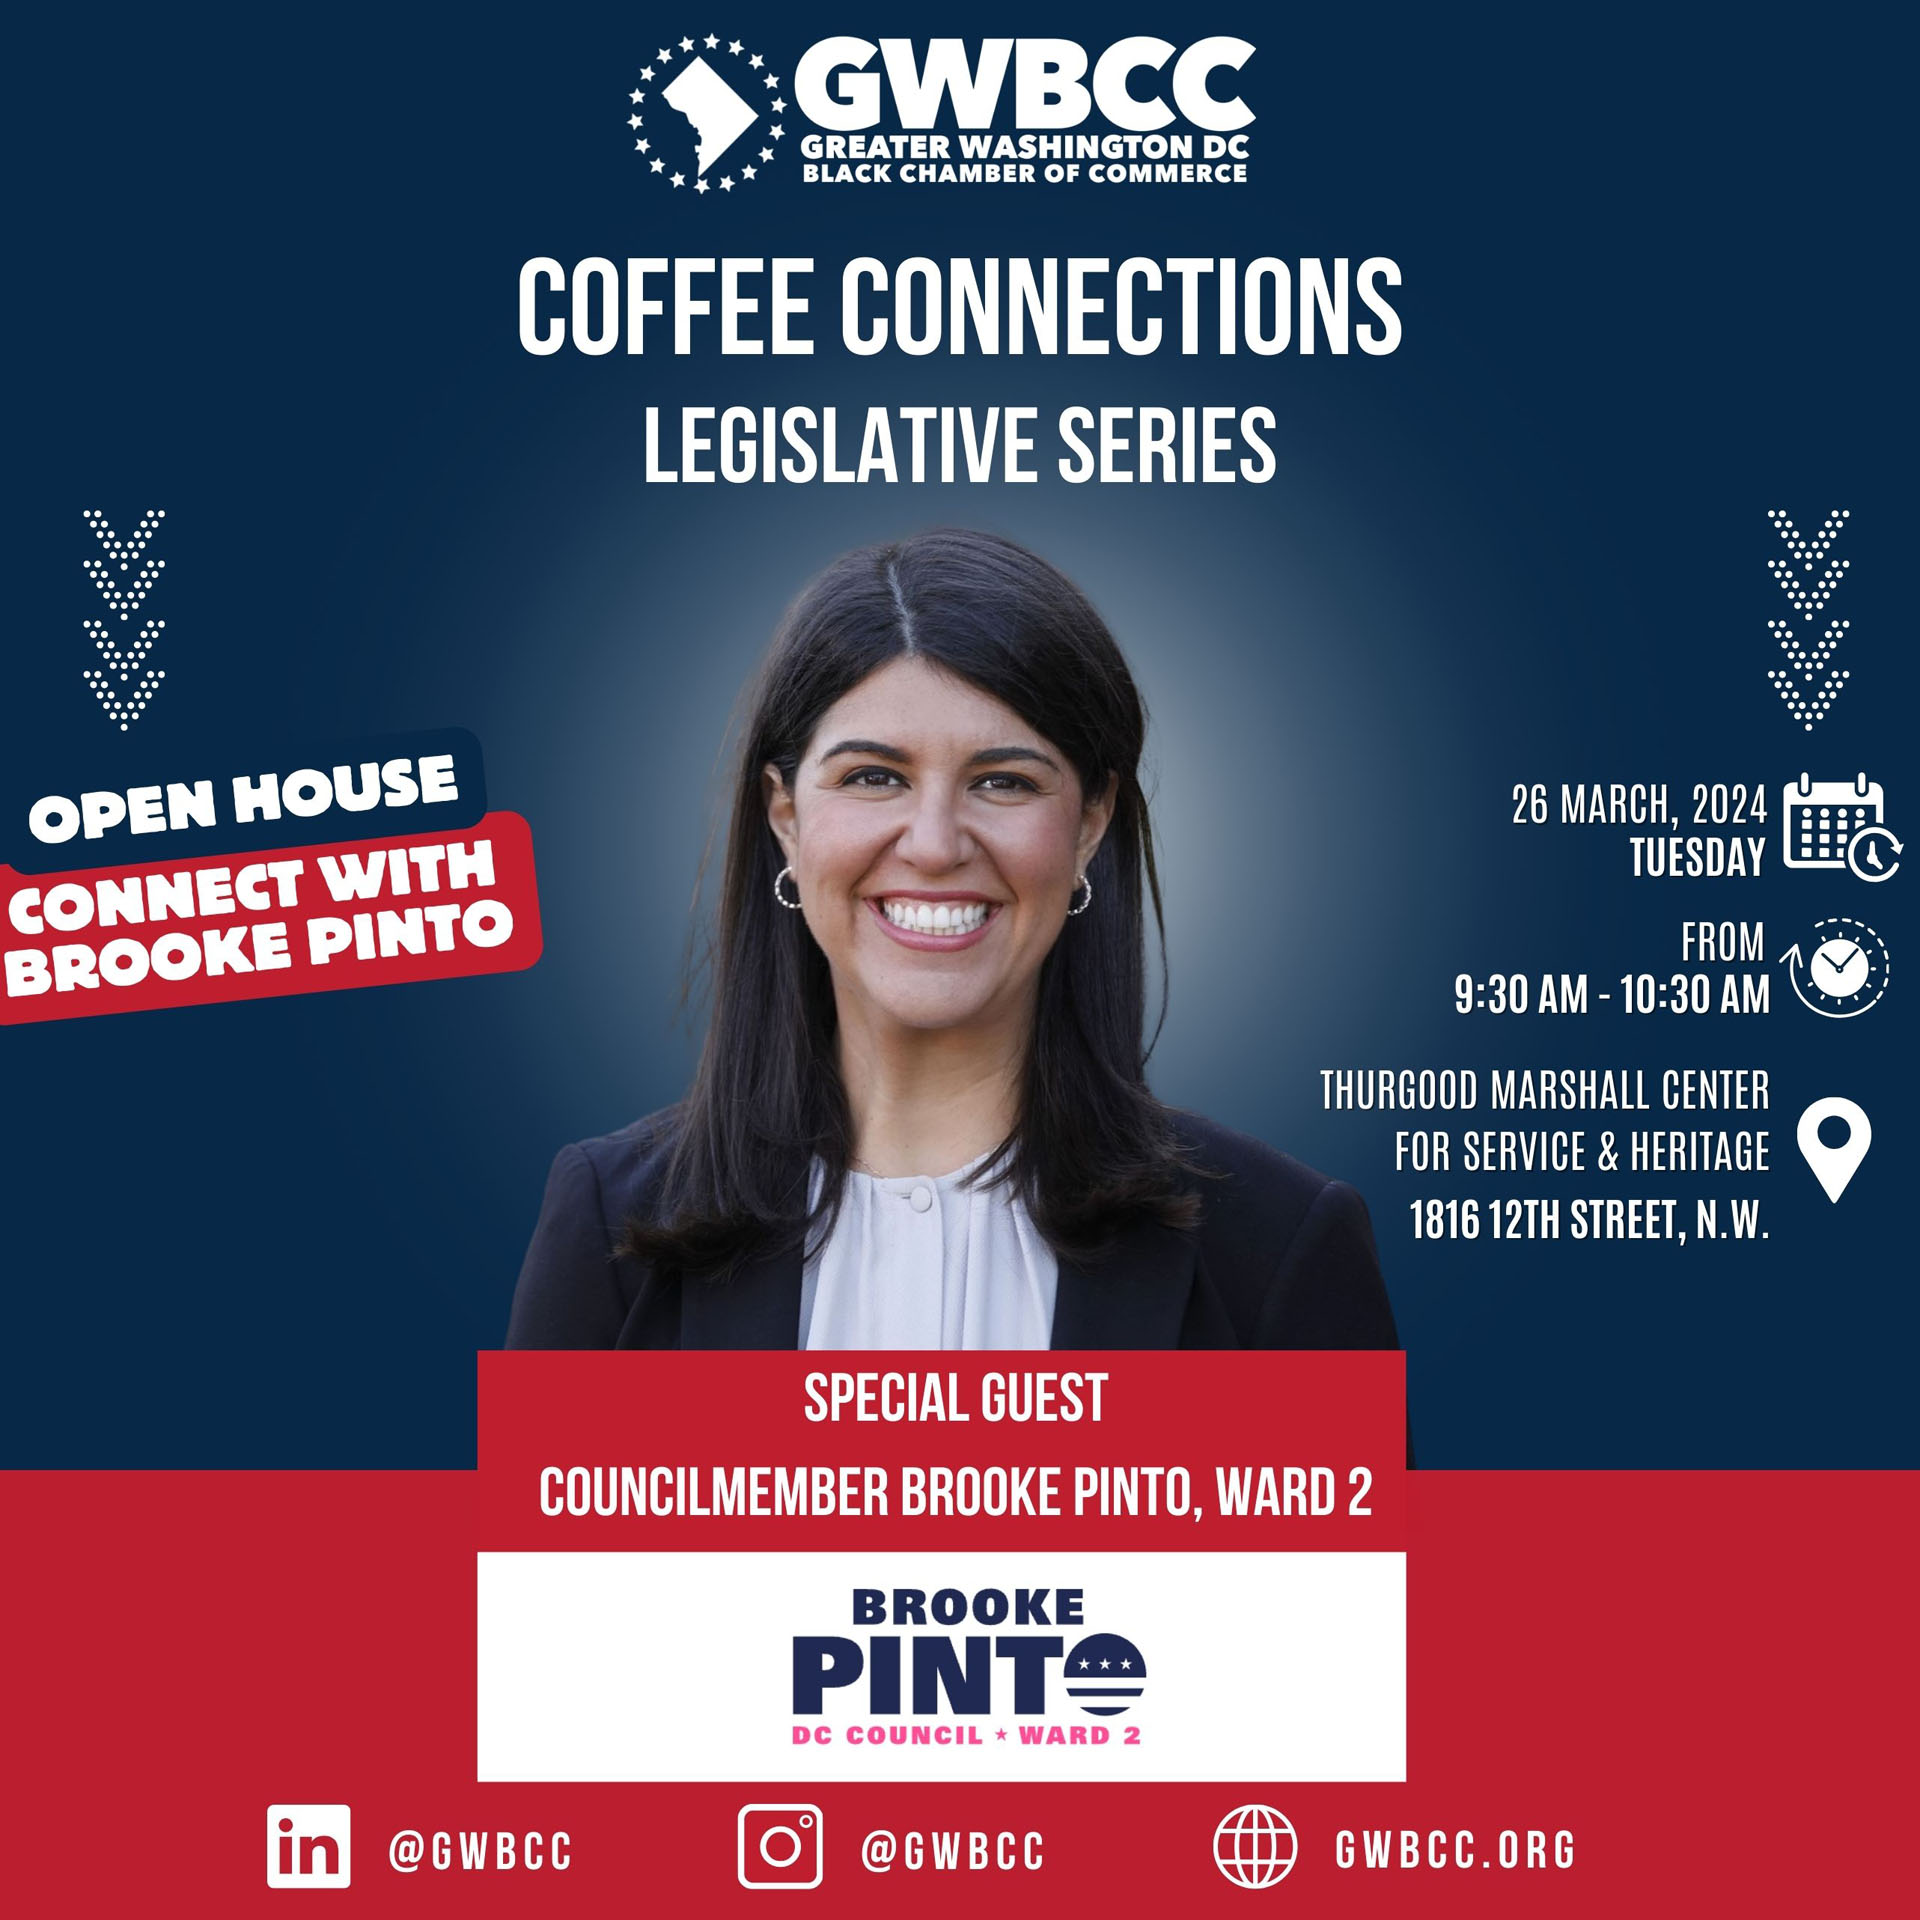 GWBCC Open House Coffee Connections